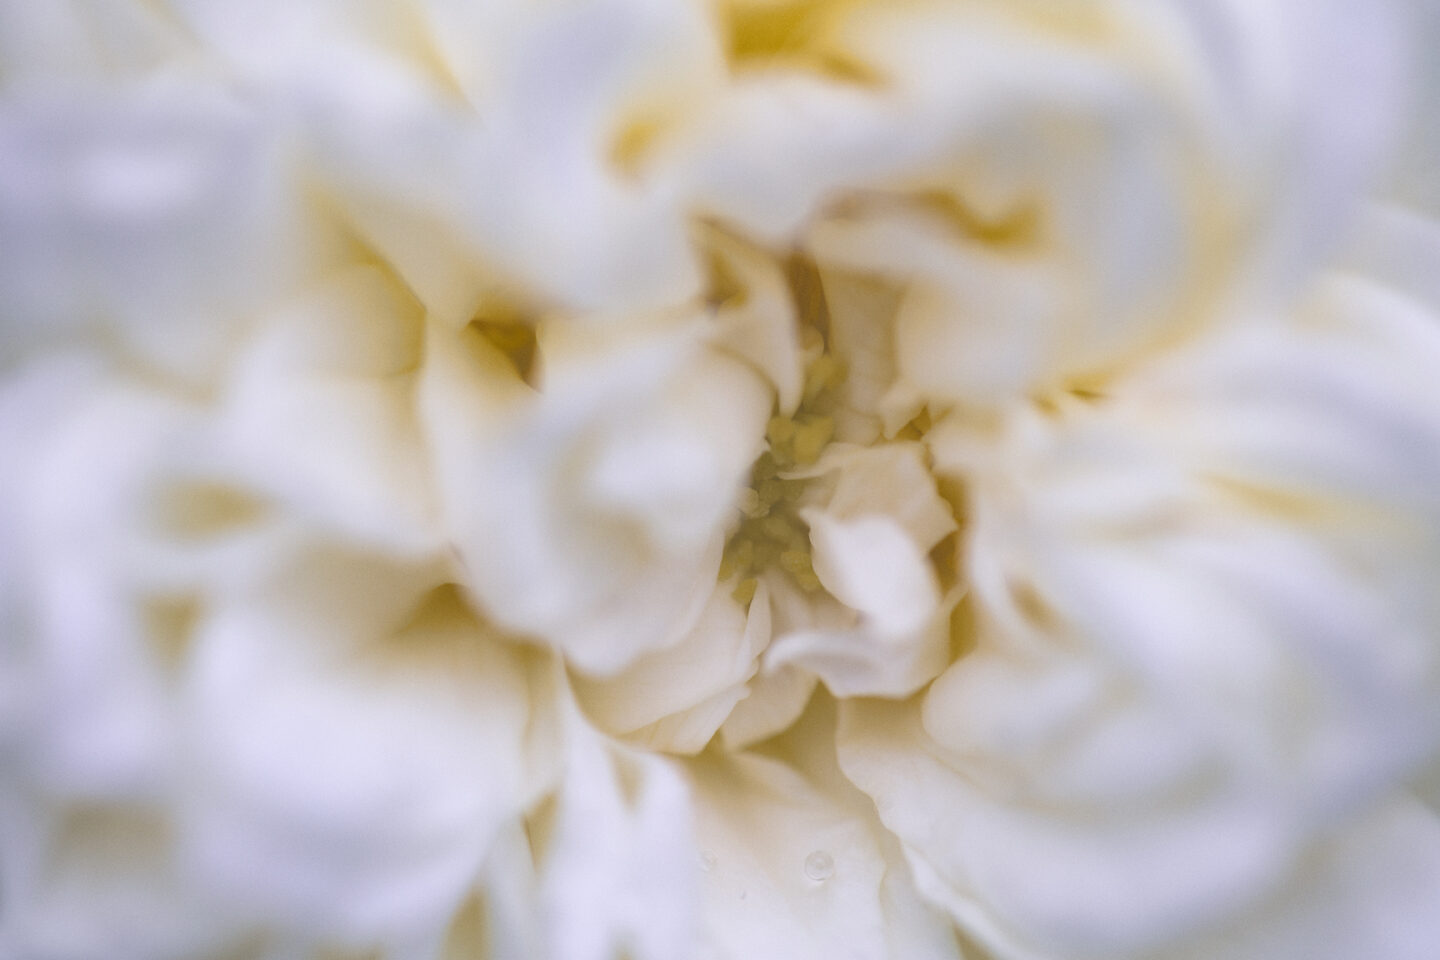 White rose heart detail/macro view, a flower at the ponds, image by Carol Schiraldi 